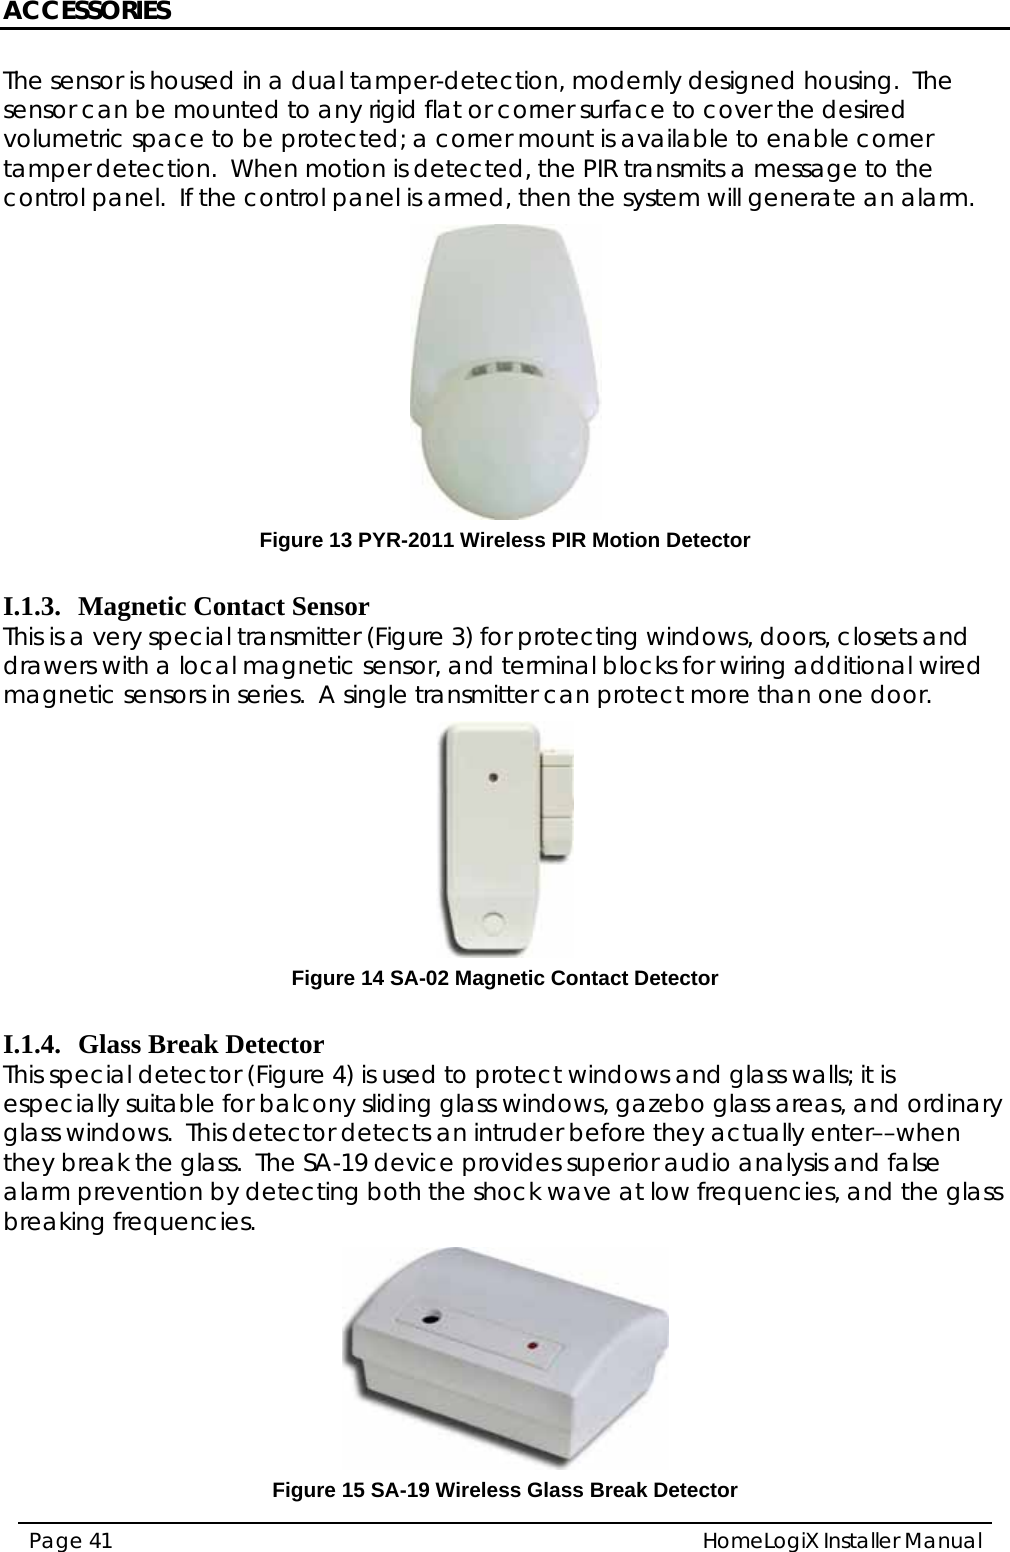 ACCESSORIES HomeLogiX Installer Manual Page 41  The sensor is housed in a dual tamper-detection, modernly designed housing.  The sensor can be mounted to any rigid flat or corner surface to cover the desired volumetric space to be protected; a corner mount is available to enable corner tamper detection.  When motion is detected, the PIR transmits a message to the control panel.  If the control panel is armed, then the system will generate an alarm.  Figure 13 PYR-2011 Wireless PIR Motion Detector  I.1.3. Magnetic Contact Sensor This is a very special transmitter (Figure 3) for protecting windows, doors, closets and drawers with a local magnetic sensor, and terminal blocks for wiring additional wired magnetic sensors in series.  A single transmitter can protect more than one door.  Figure 14 SA-02 Magnetic Contact Detector  I.1.4. Glass Break Detector This special detector (Figure 4) is used to protect windows and glass walls; it is especially suitable for balcony sliding glass windows, gazebo glass areas, and ordinary glass windows.  This detector detects an intruder before they actually enter––when they break the glass.  The SA-19 device provides superior audio analysis and false alarm prevention by detecting both the shock wave at low frequencies, and the glass breaking frequencies.    Figure 15 SA-19 Wireless Glass Break Detector 